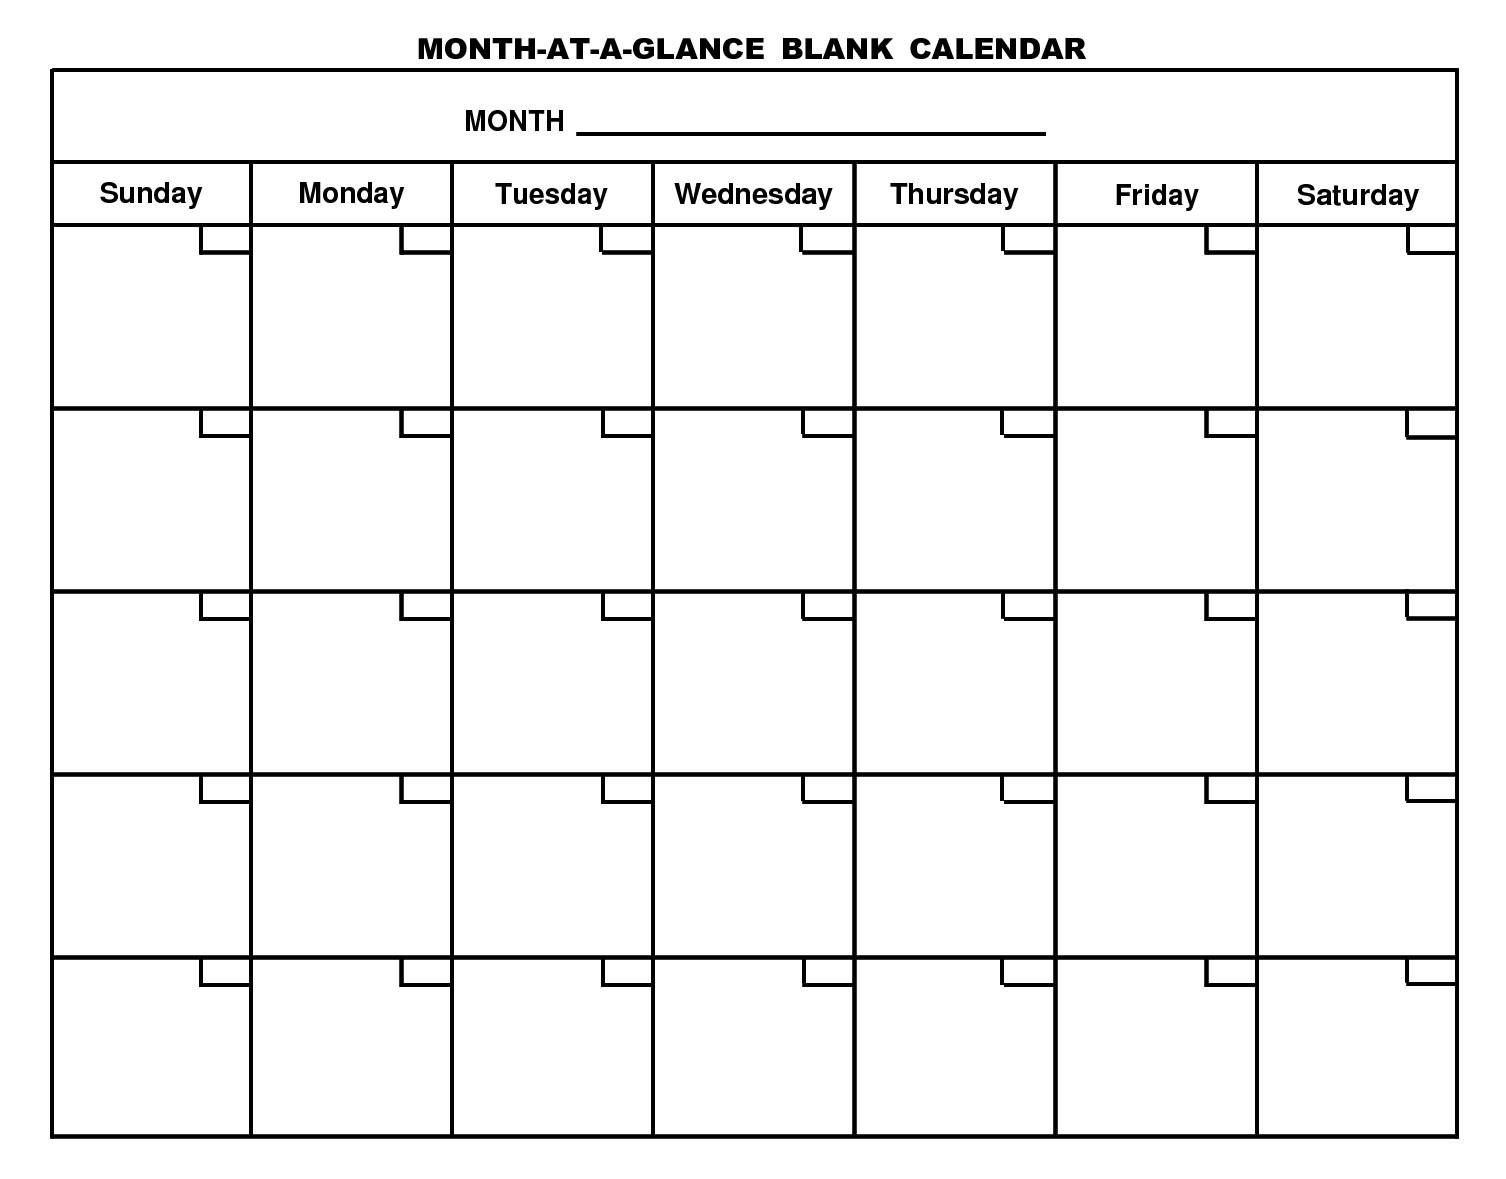 Pinstacy Tangren On Work | Blank Calendar Pages, Free With Blank Calander Template